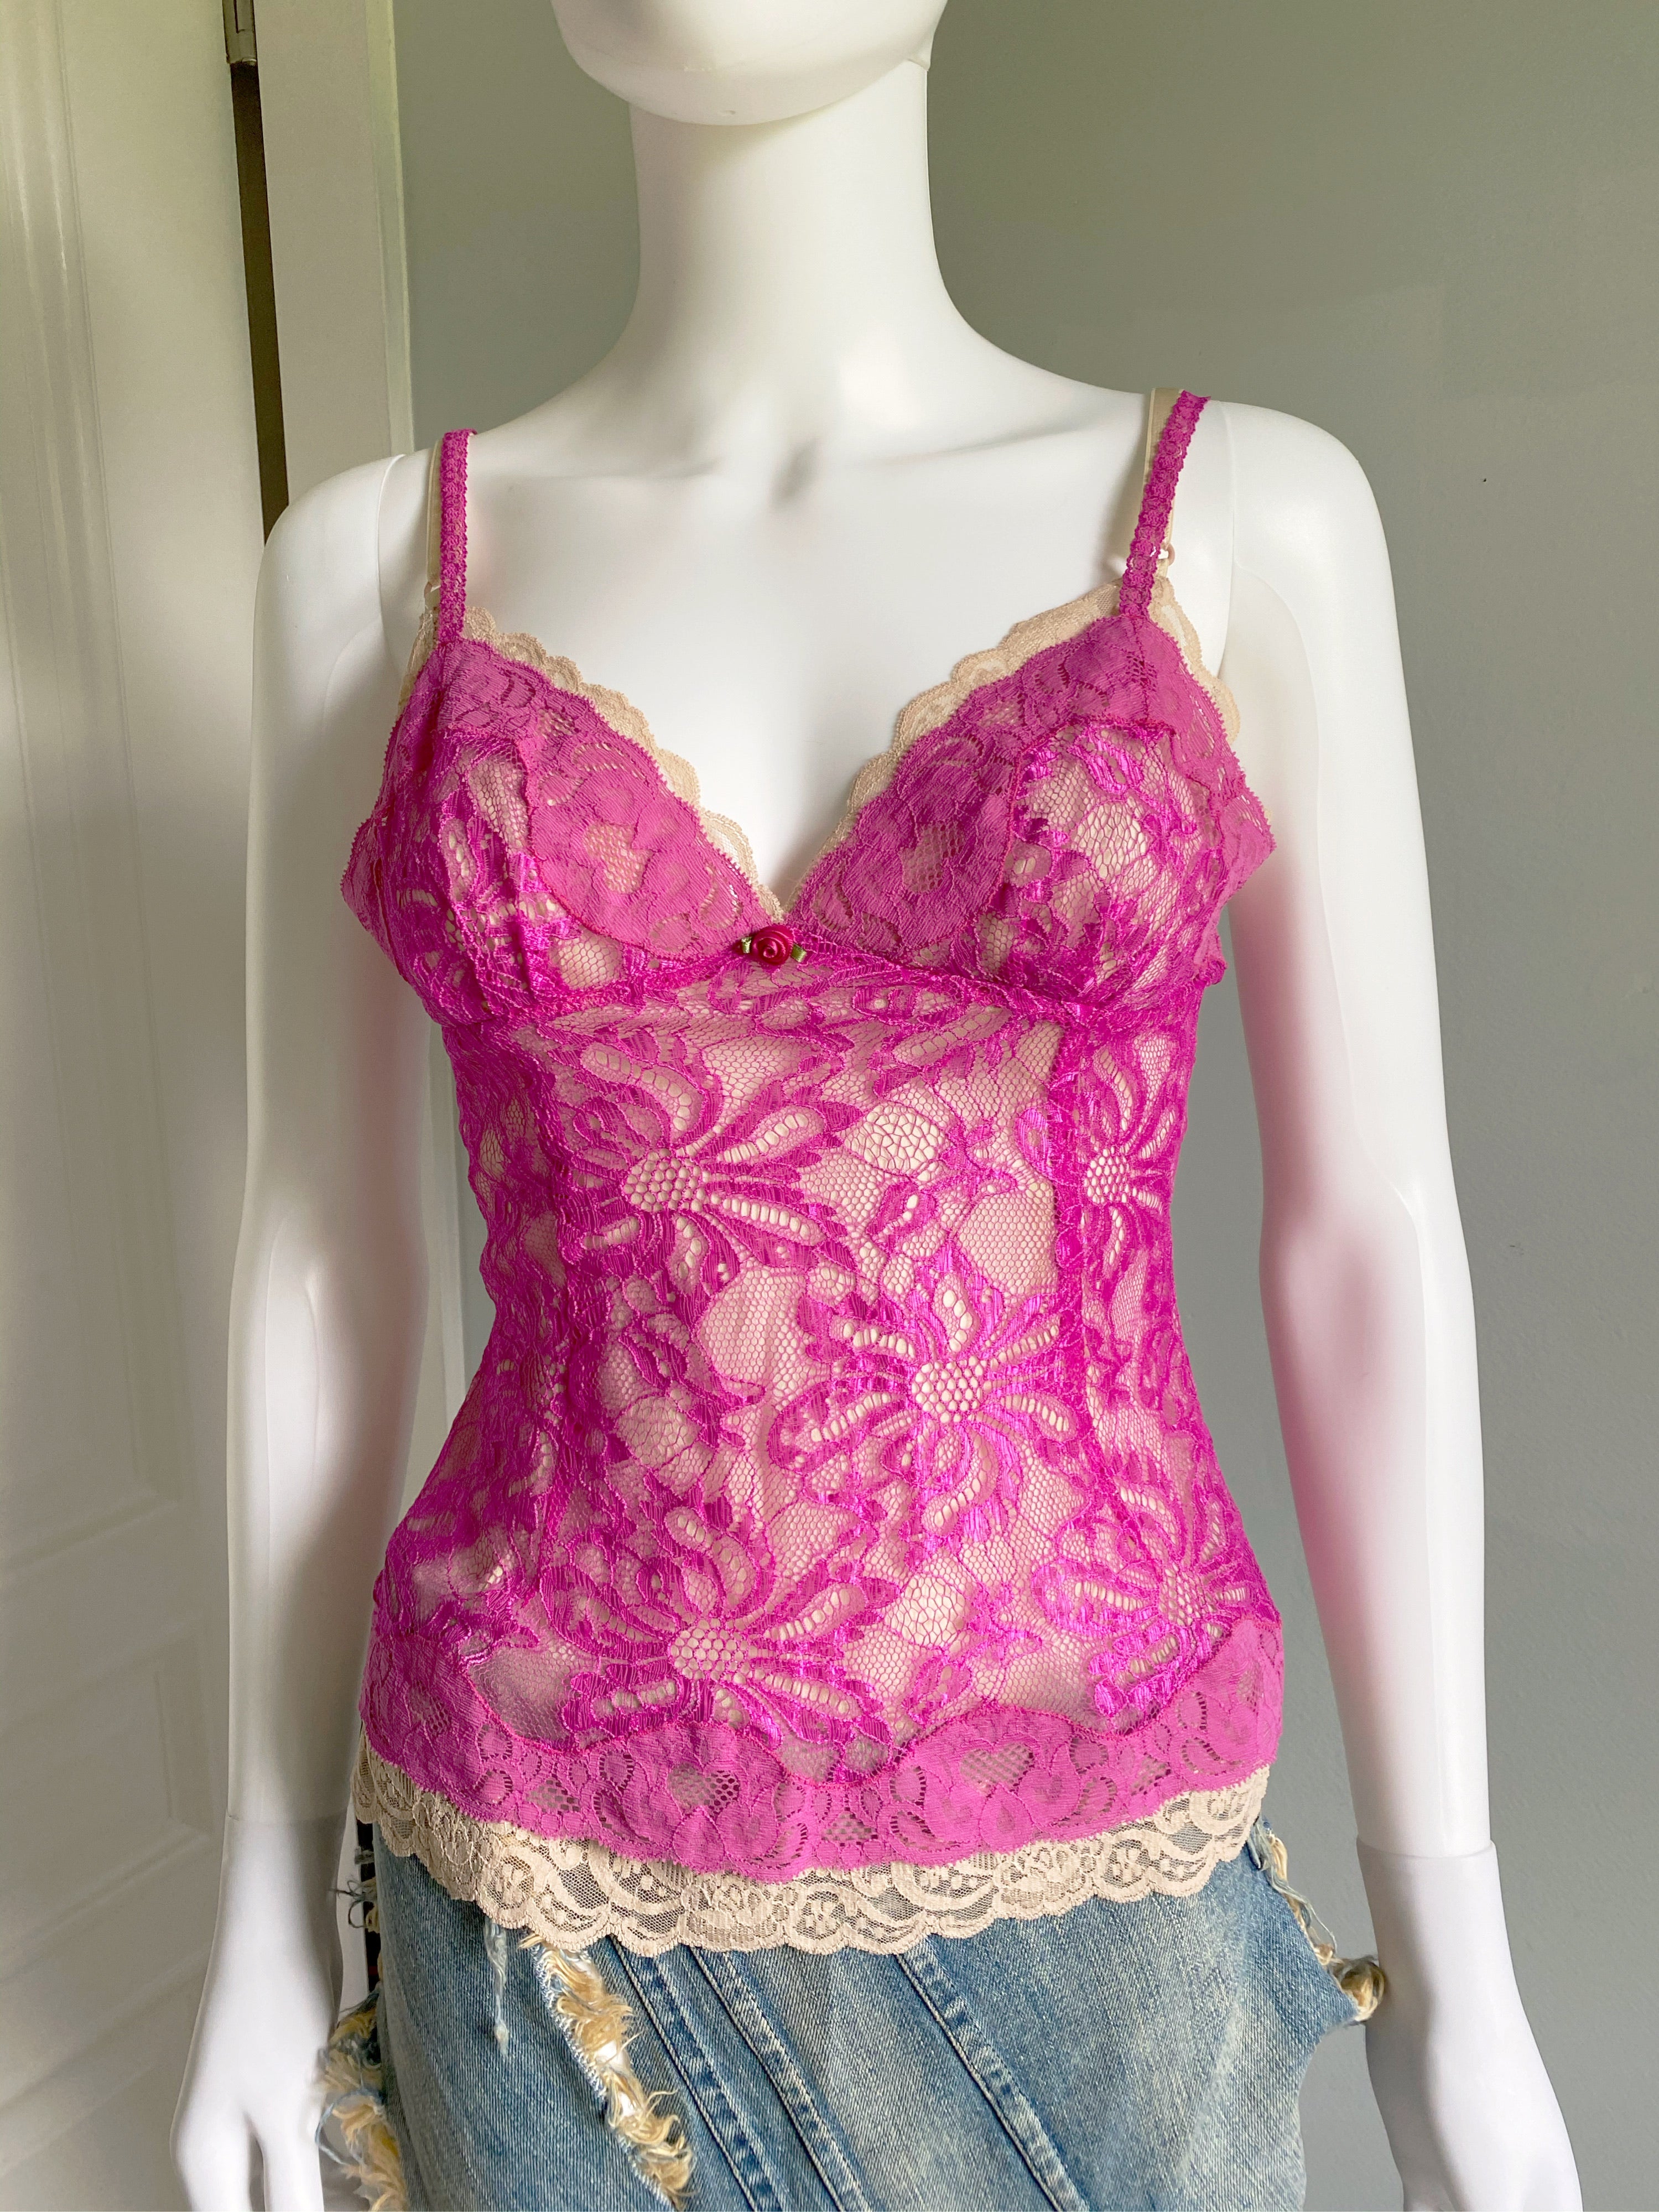 Dolce & Gabanna lace pink top